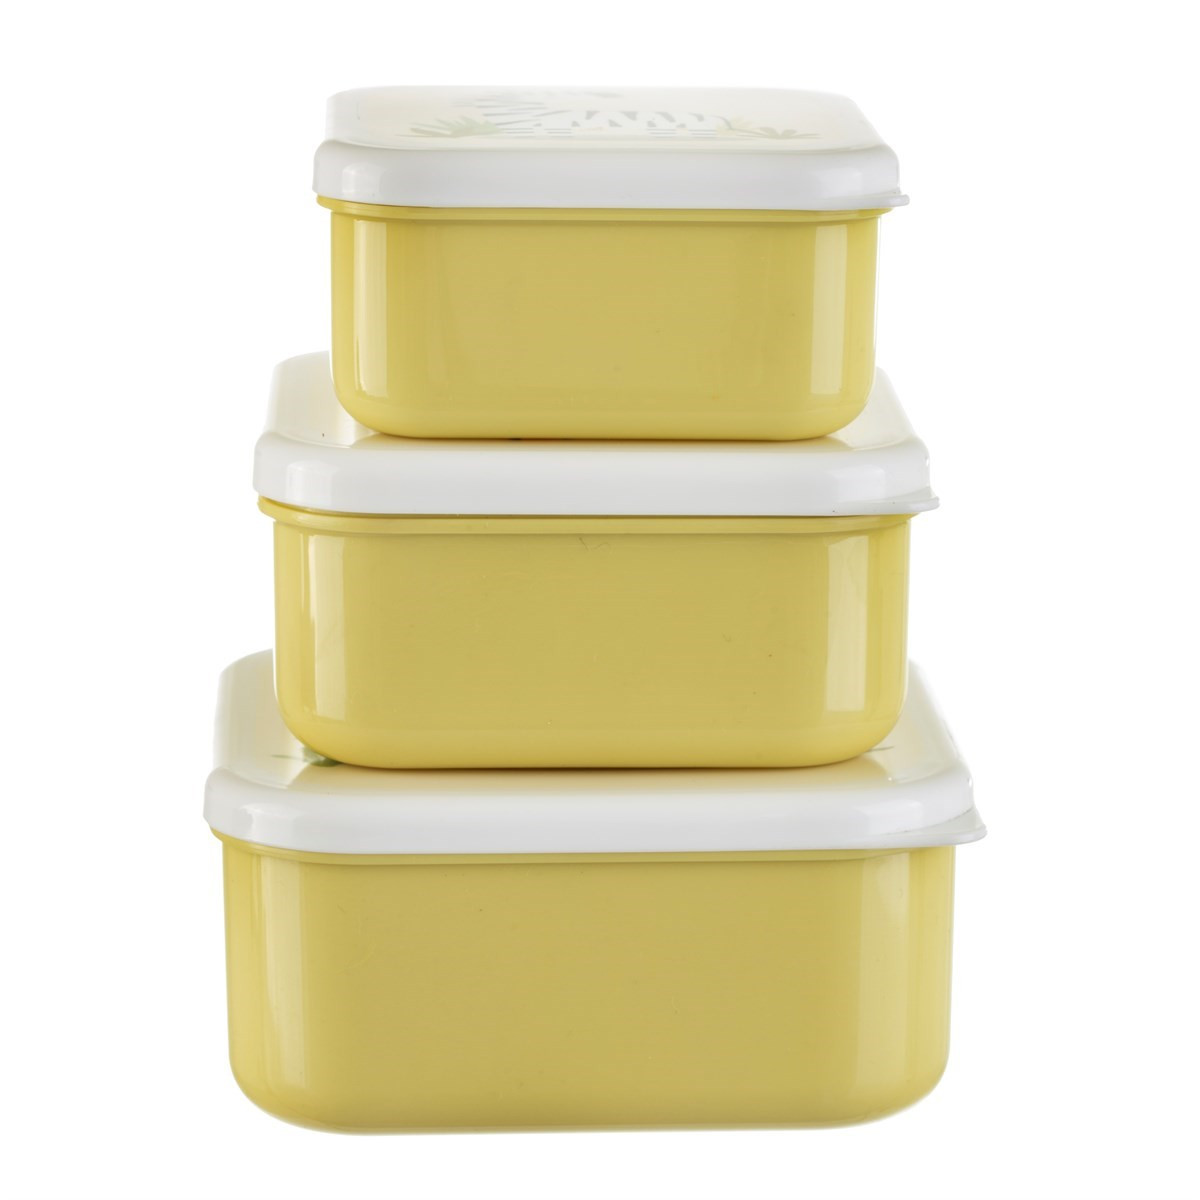 Sass & Belle Safari Lunch Boxes, Yellow - 3 Pack>